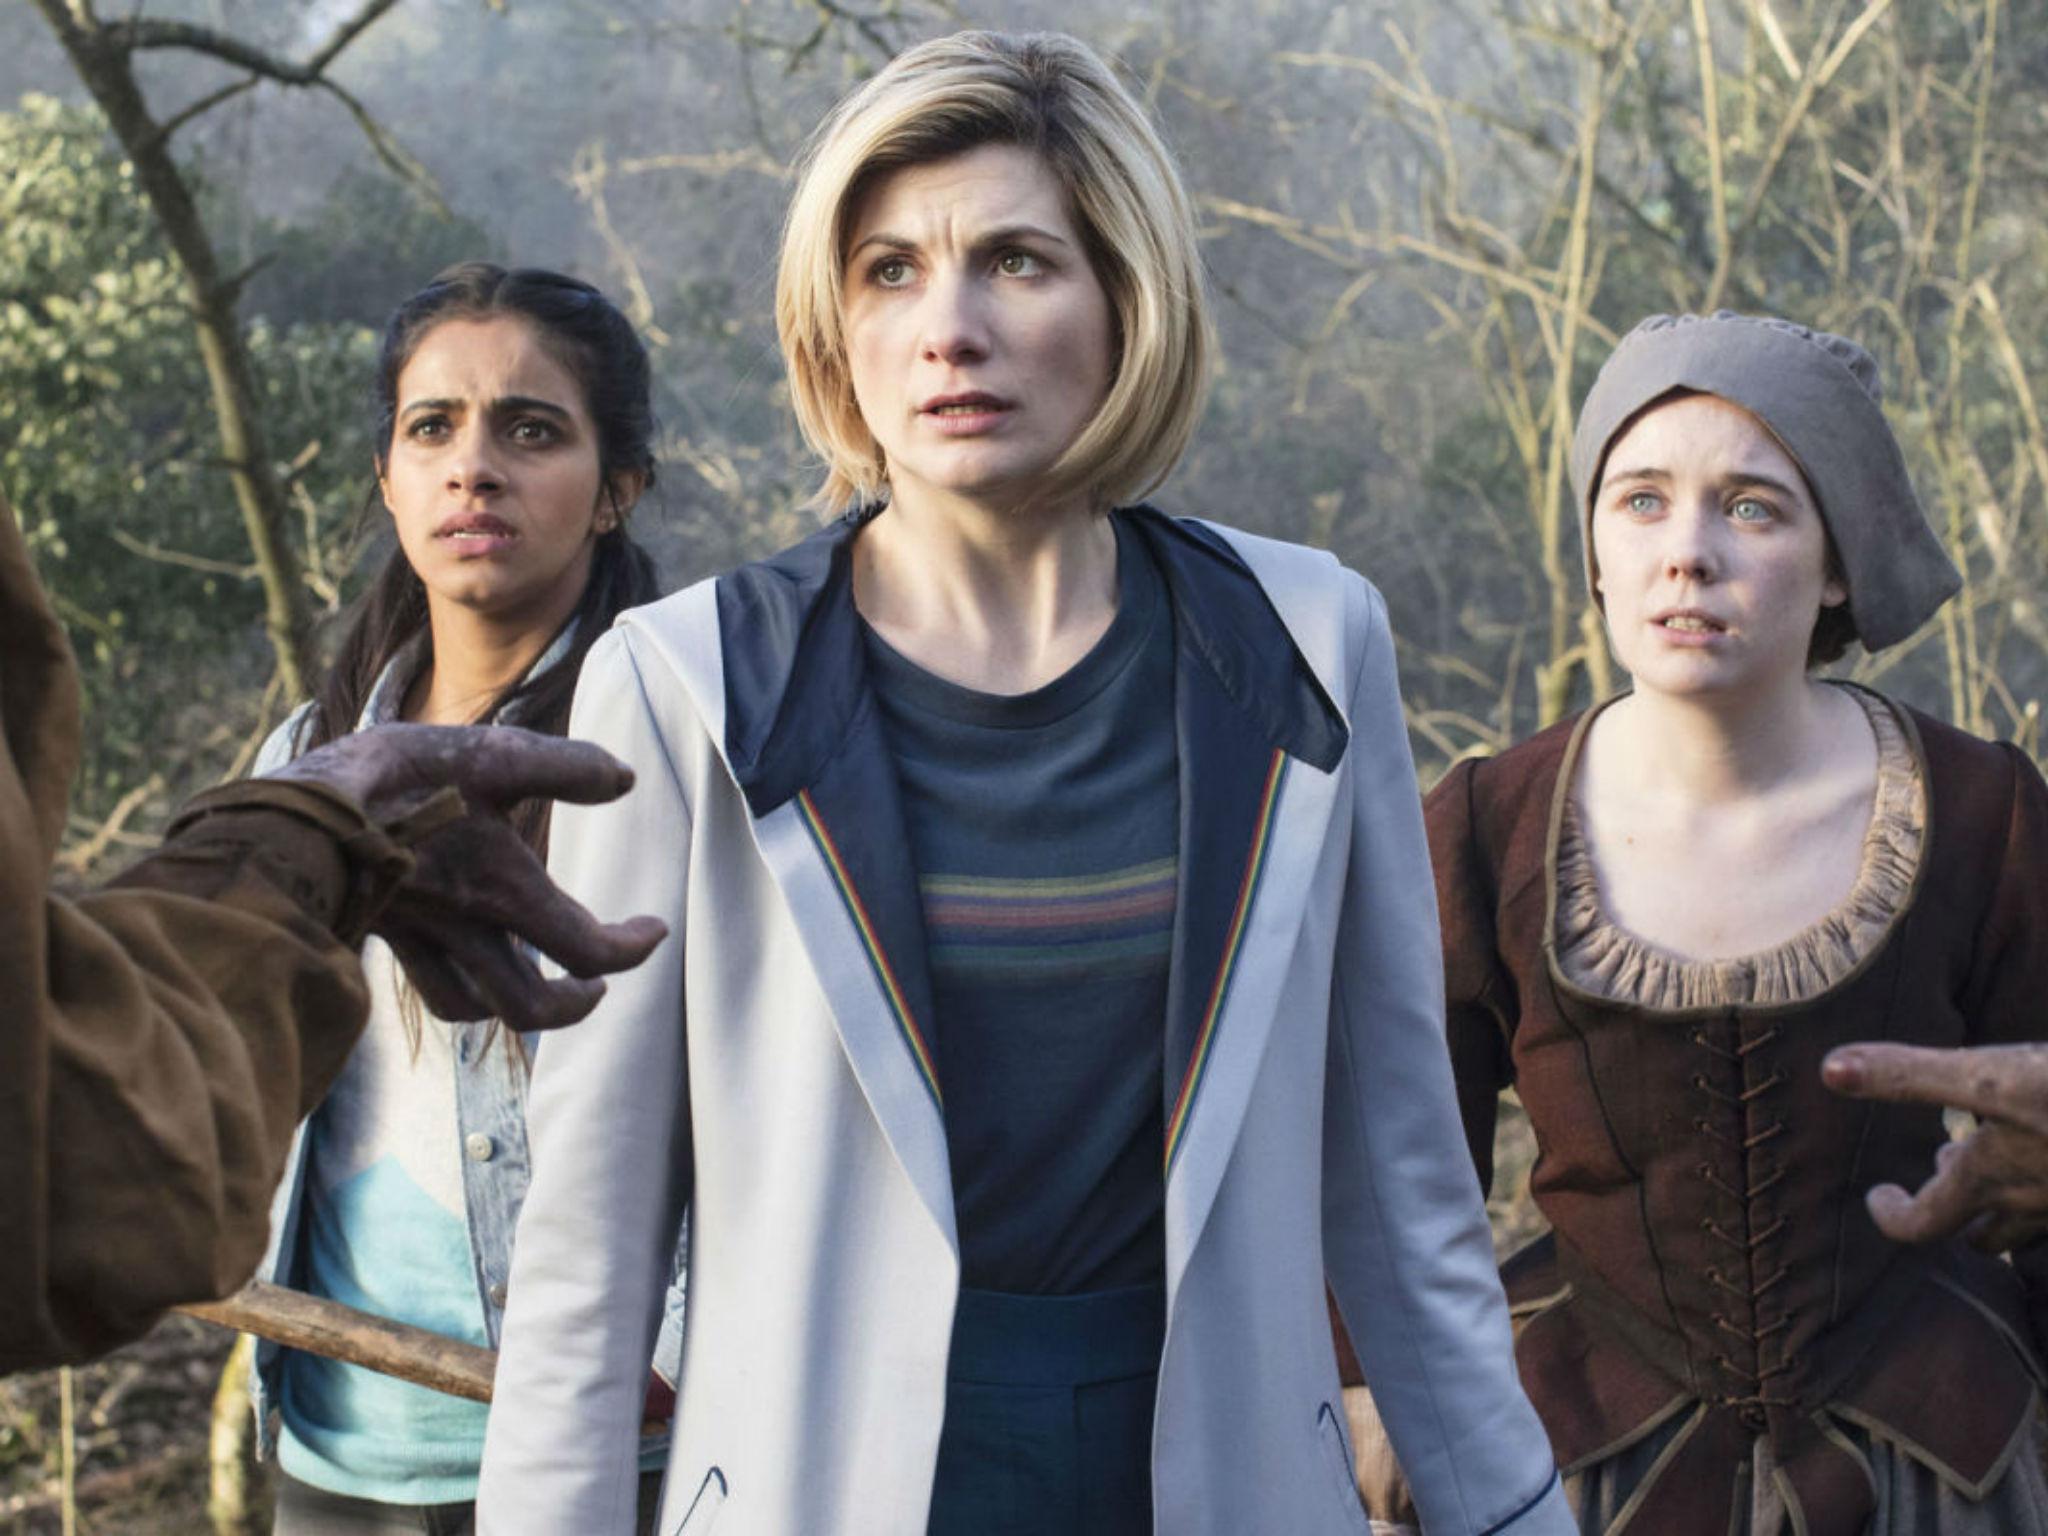 Jodie Whittaker in the latest terrifying ‘Doctor Who’ adventure